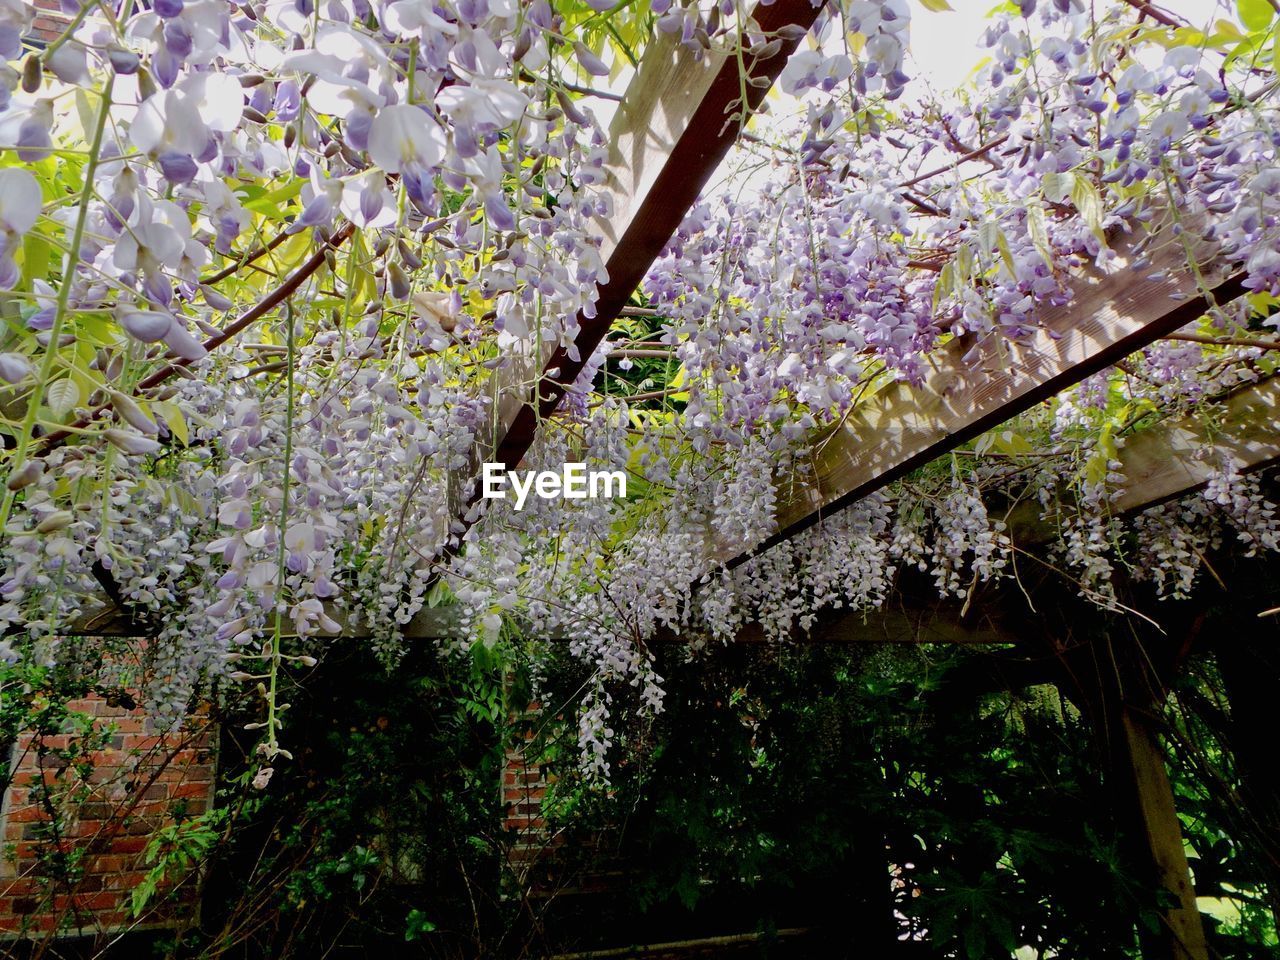 Low angle view of wisteria flowers hanging on roof beam